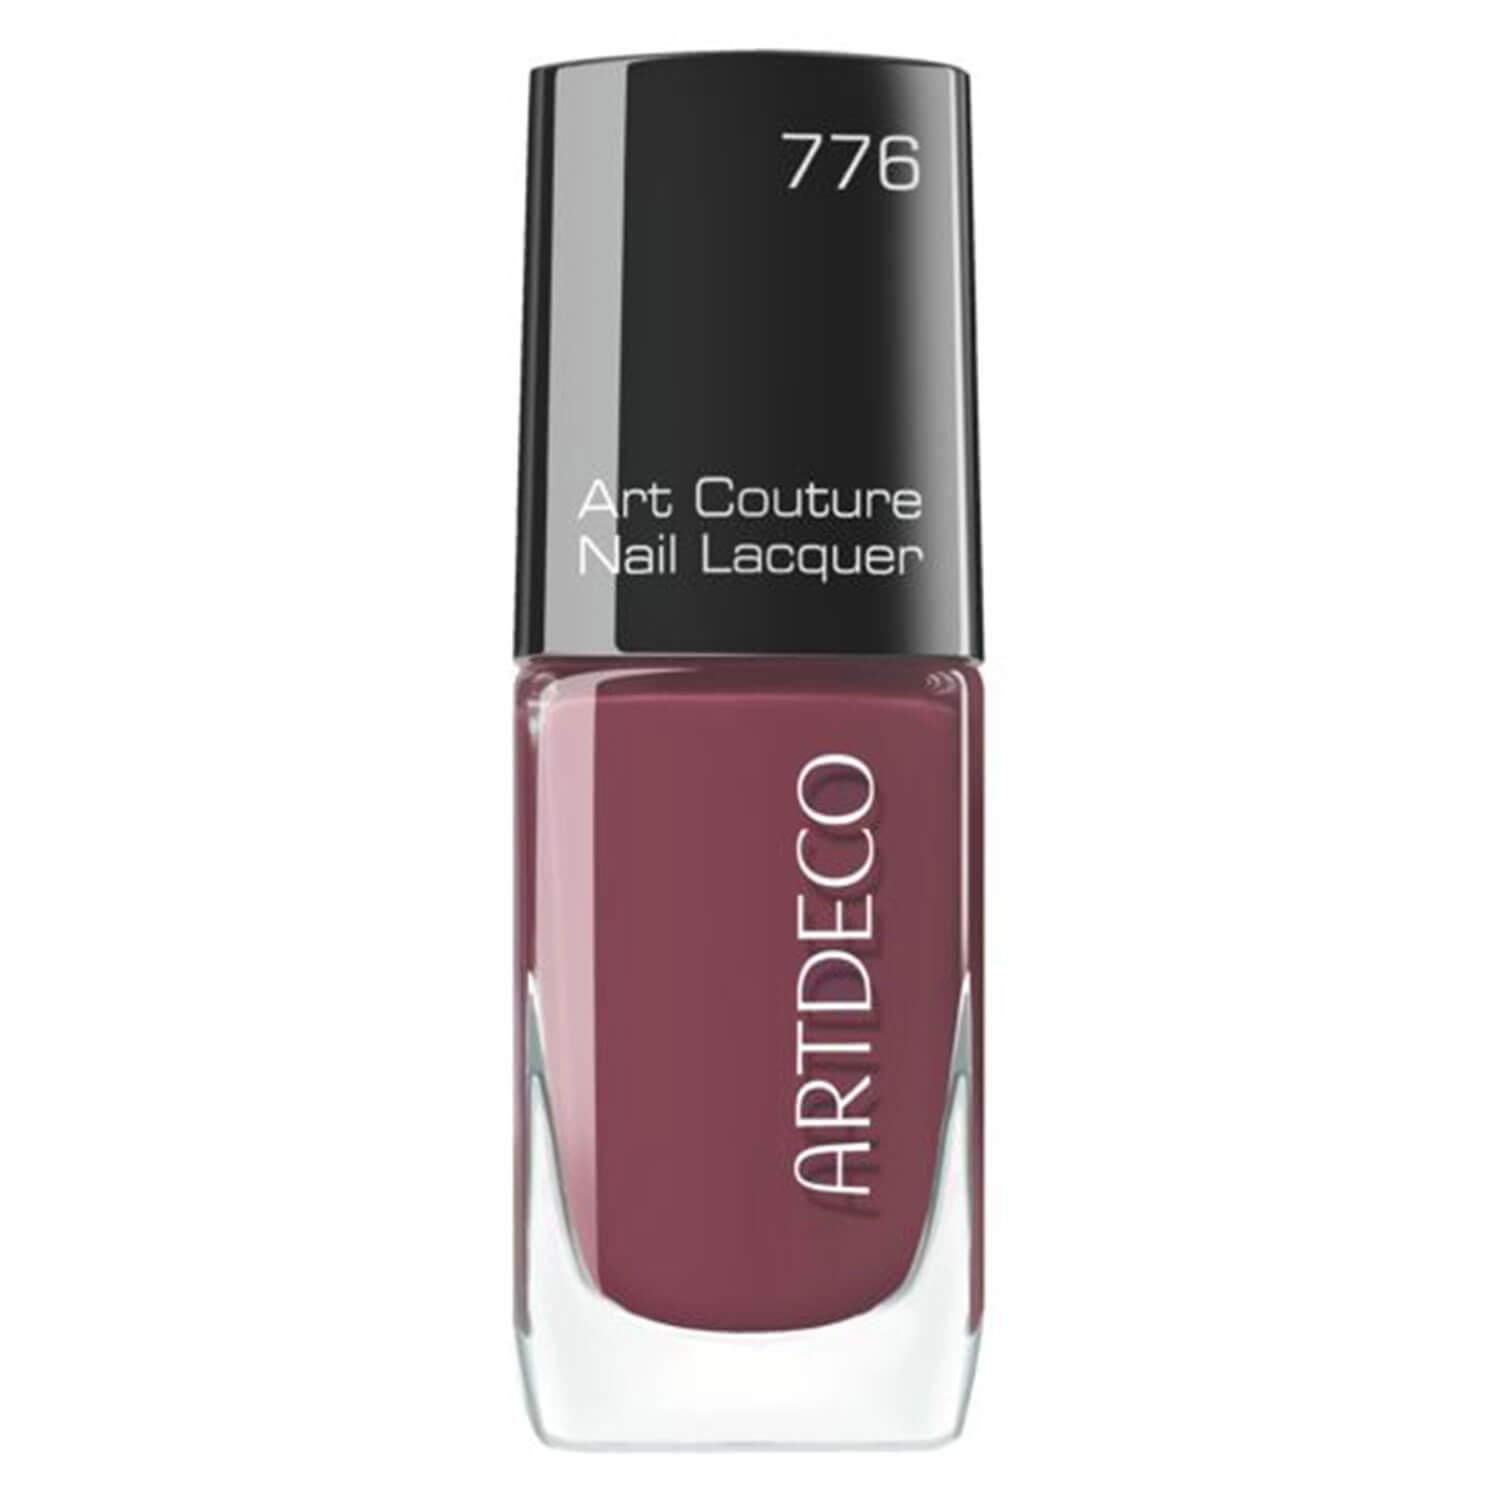 Art Couture - Nail Lacquer Red Oixde 776